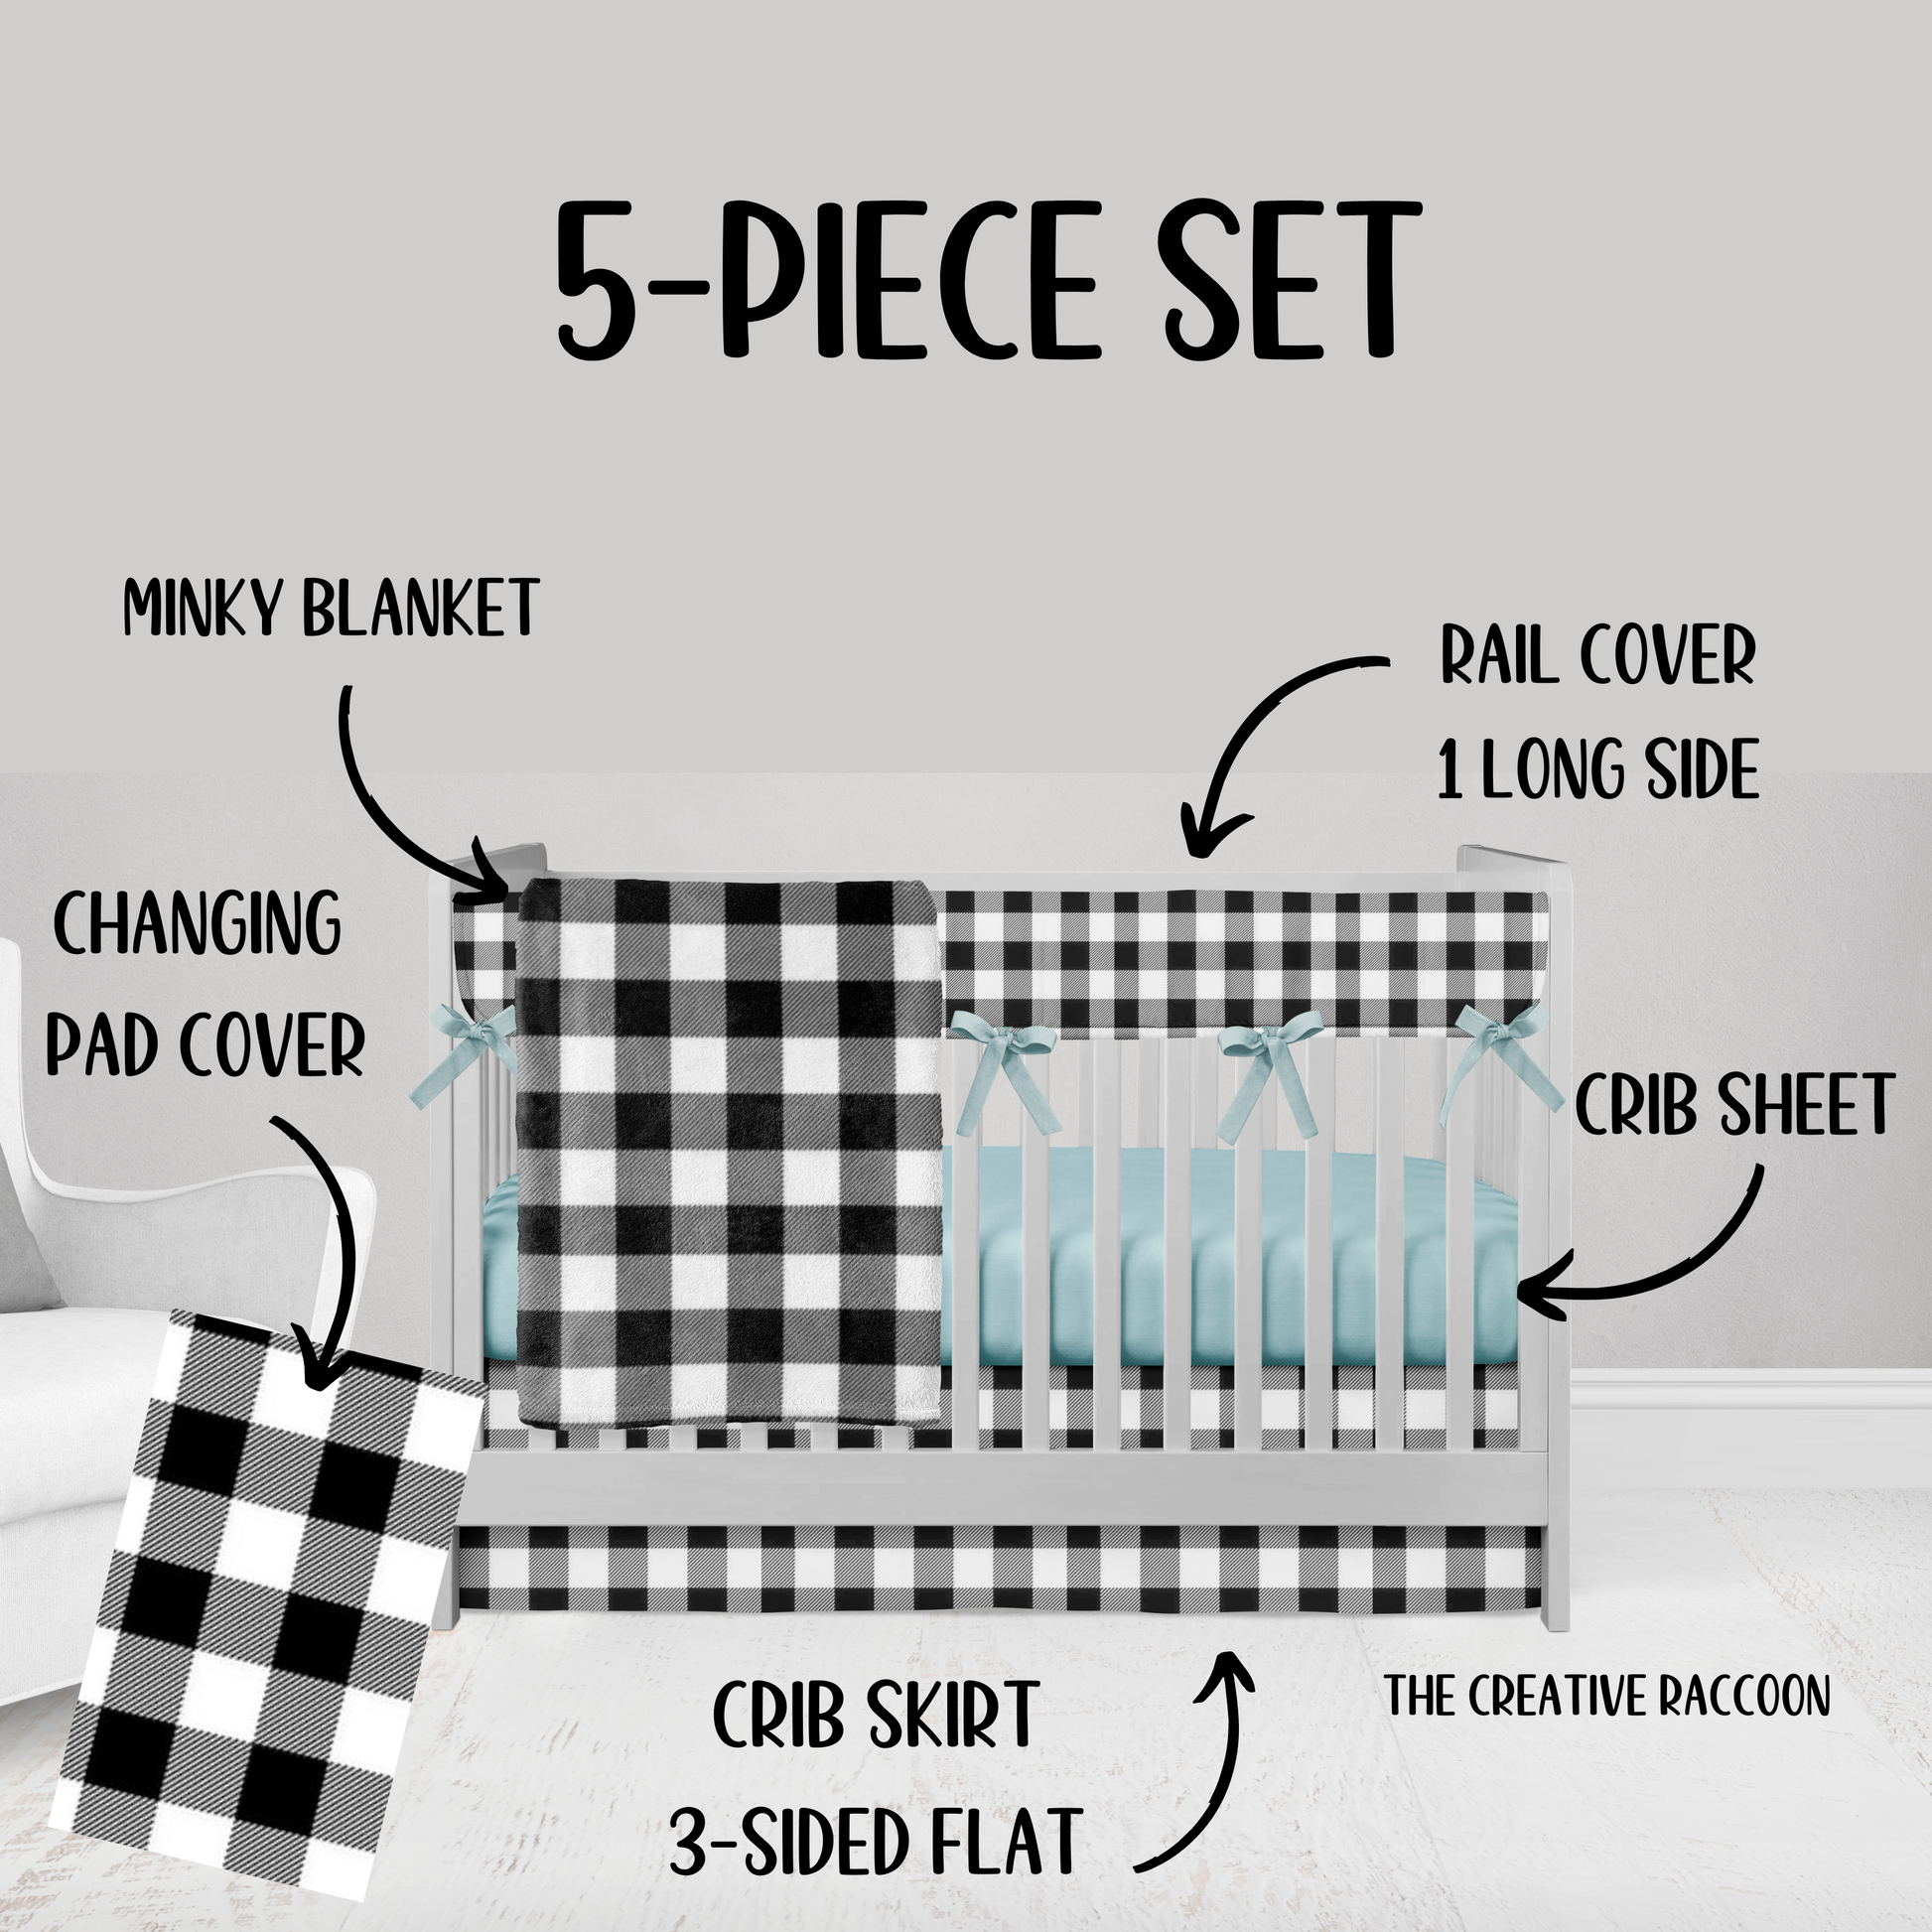 5-piece set- black gingham blanket, rail cover & crib skirt with aqua sheet and aqua ties on the rail cover, gingham changing pad cover. all the gingham check will be the same size squares.